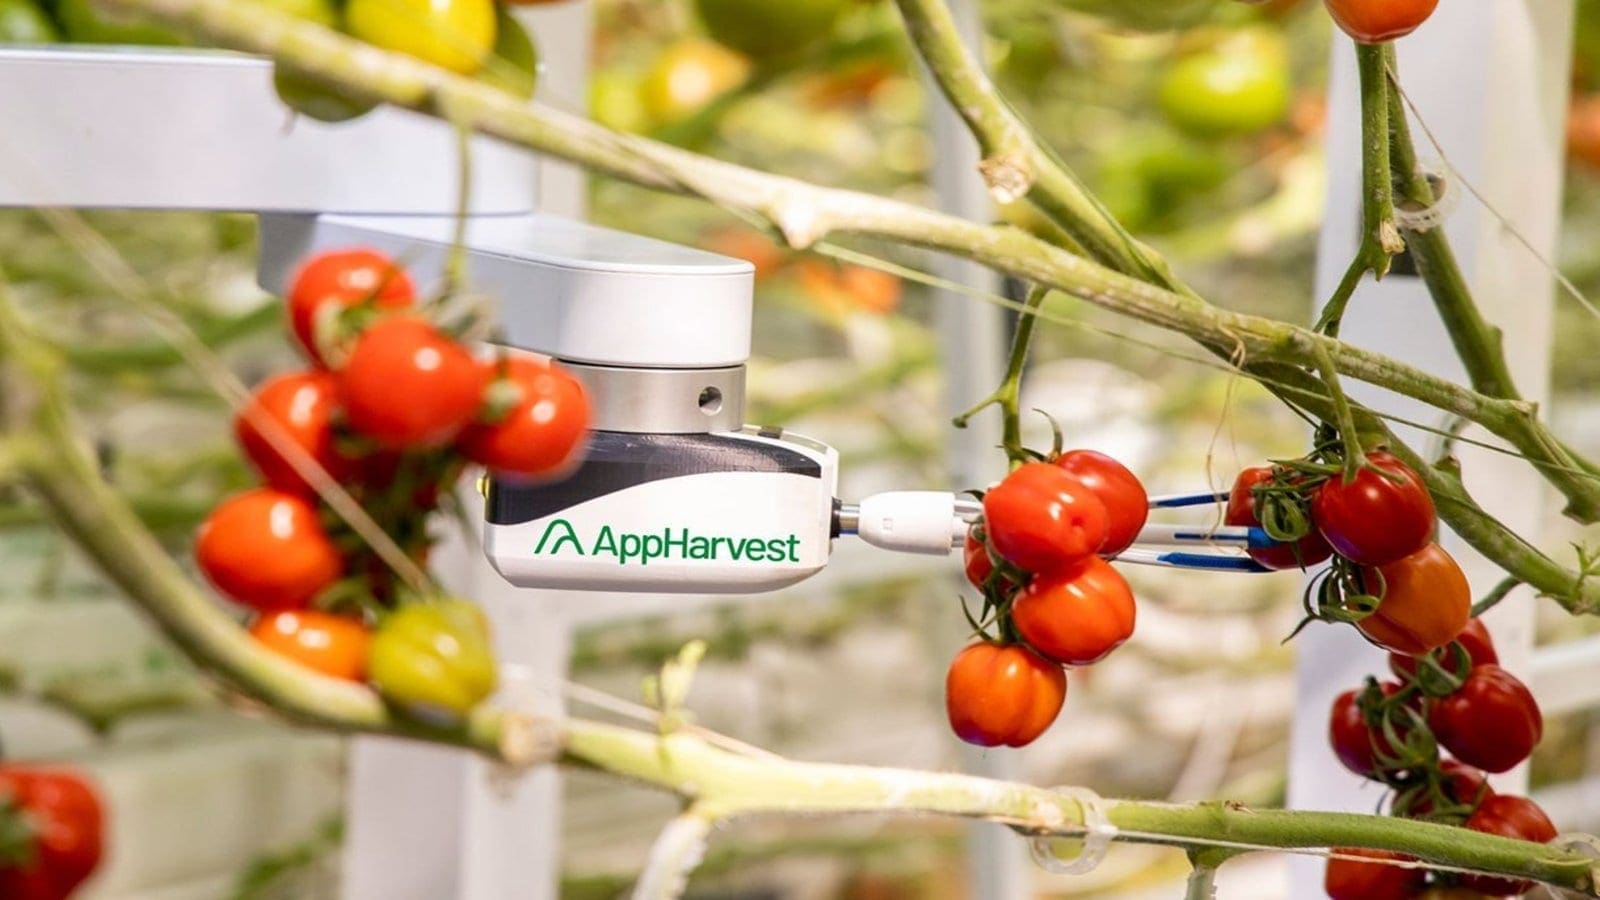 AppHarvest acquires agricultural robotics company as Singaporean firm deploys robots in grocery delivery